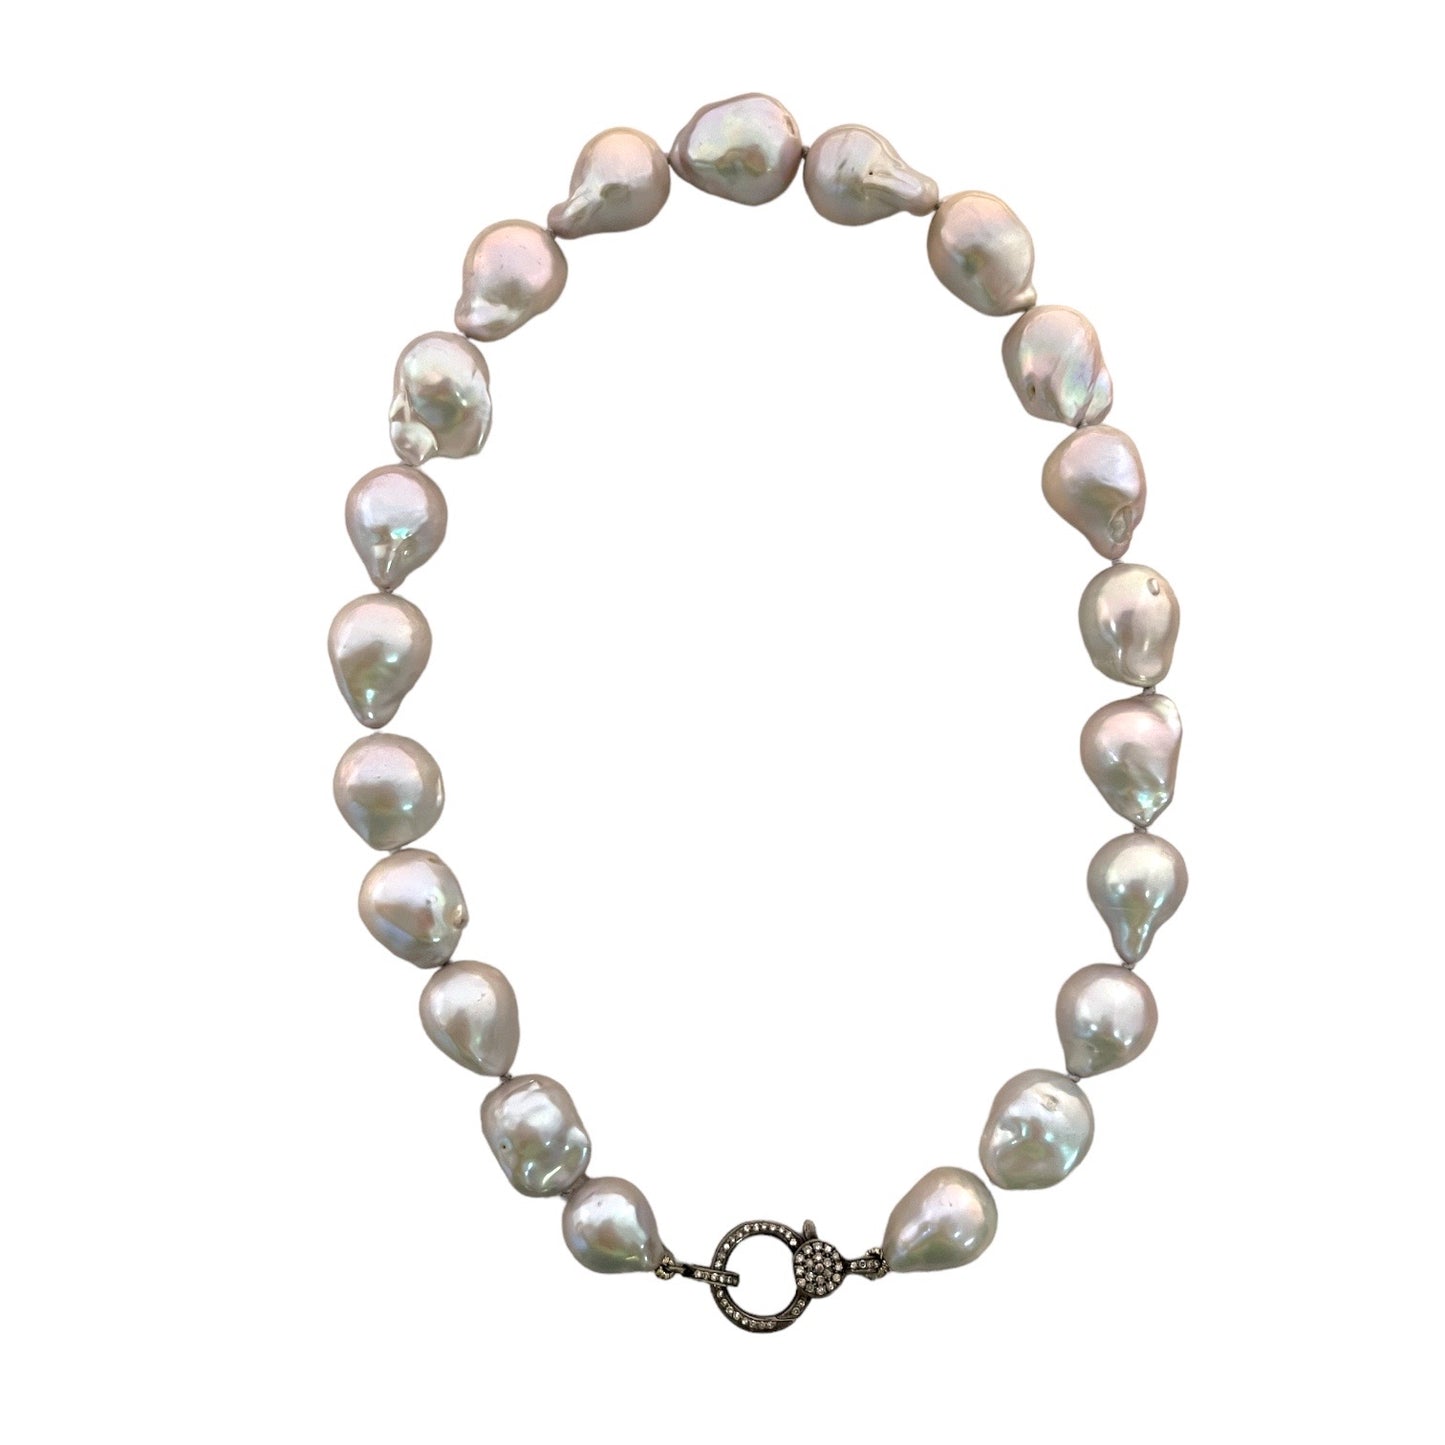 Knotted Baroque Freshwater Pearl Necklace